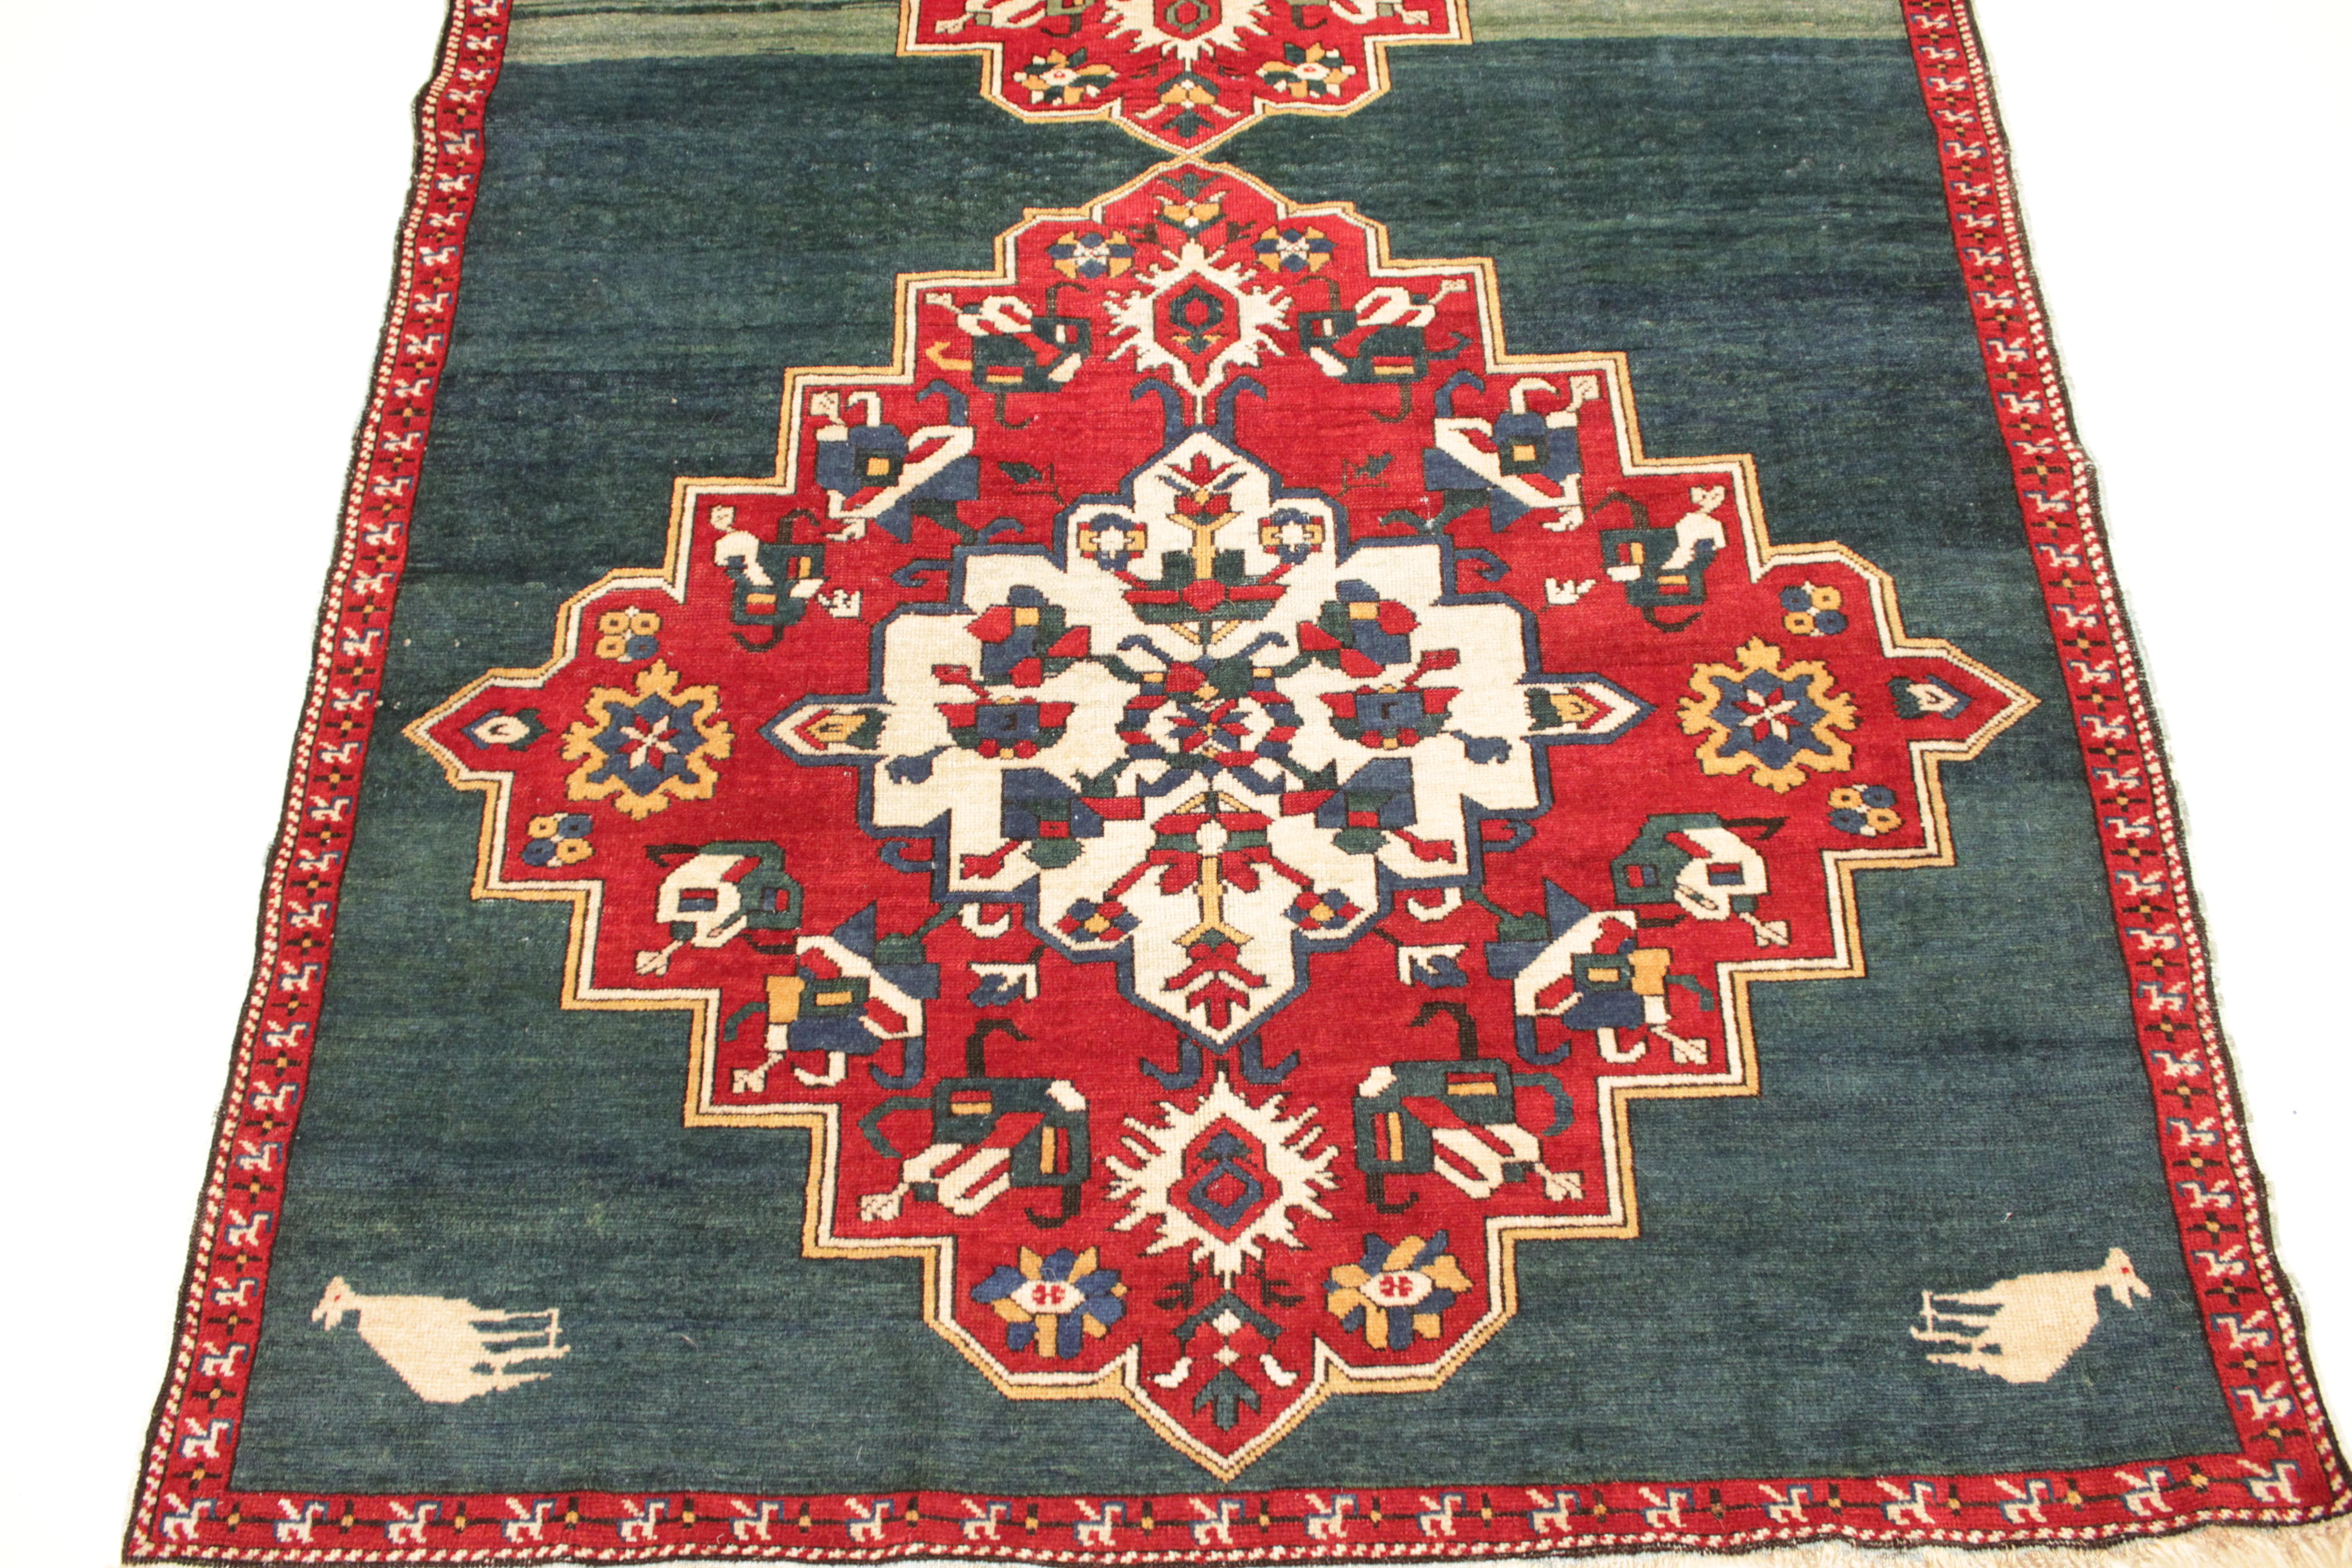 A fine and rare antique Caucasian Zeikhur rug, distinguished by a fairly unique teal green background onto which are layered two red large medallions with abstract zoomorphic elements and with stepped contours, each encapsulating an ivory star-like